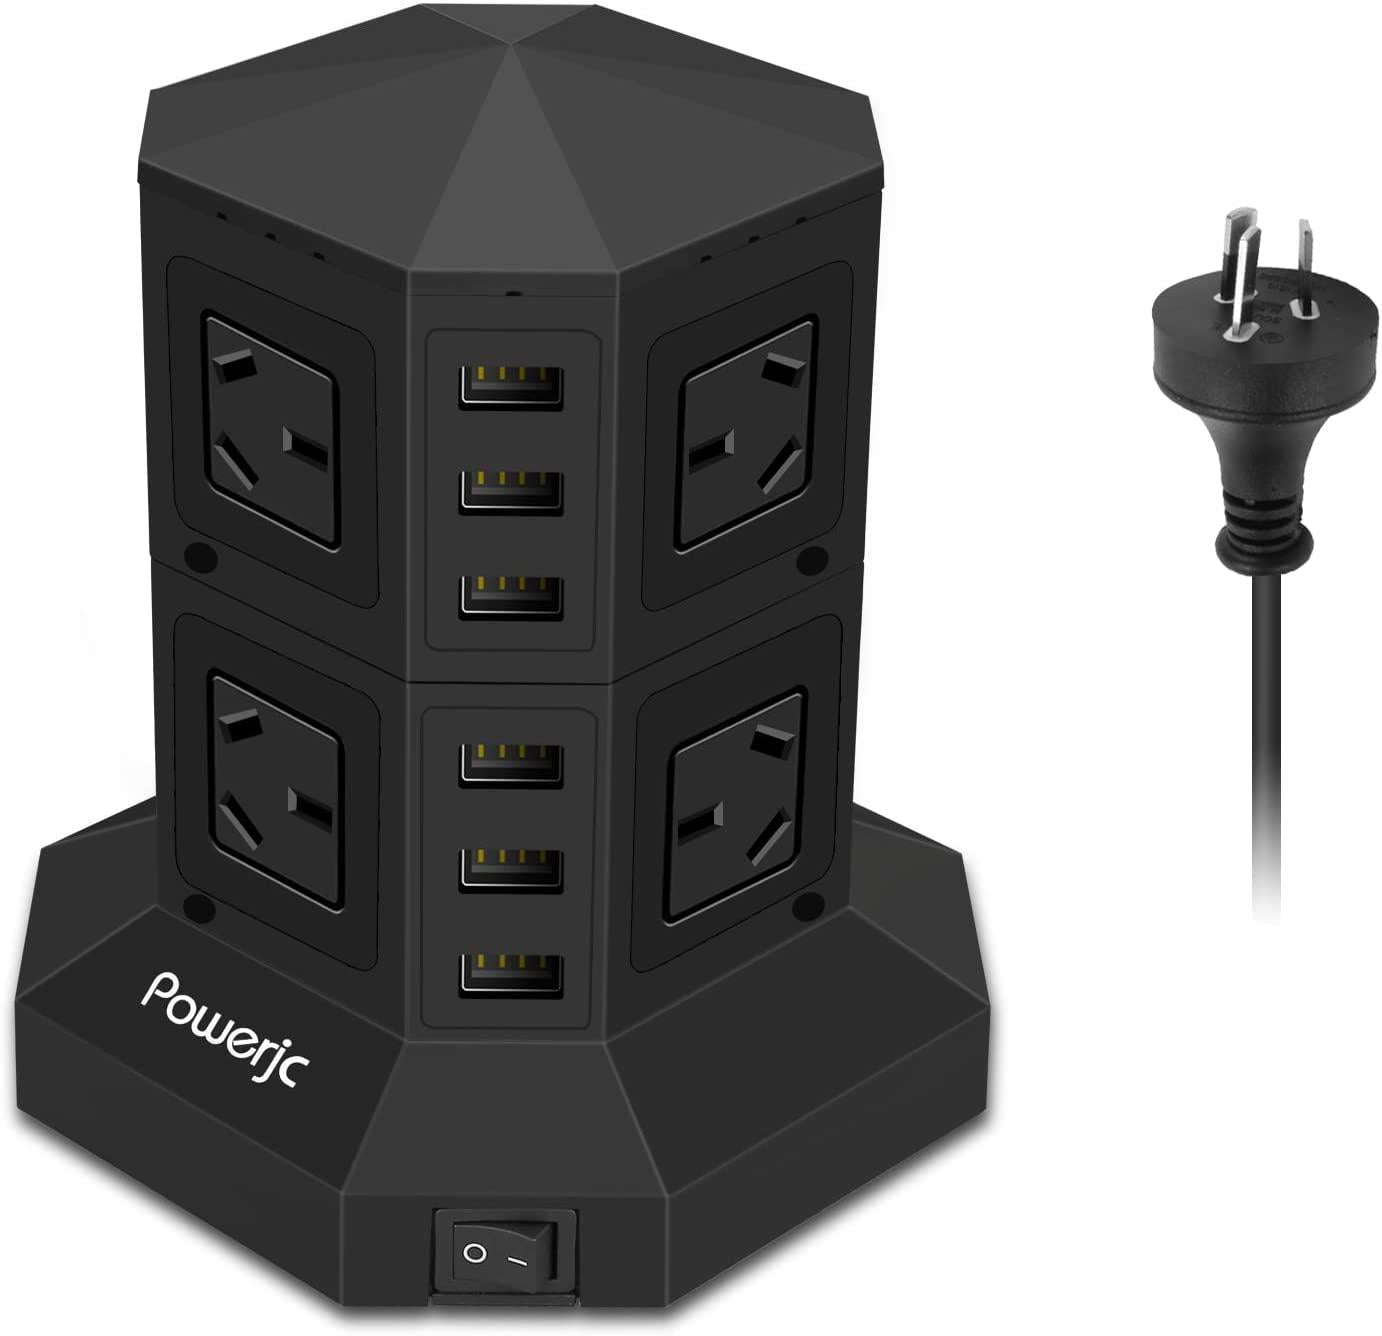 Powerjc, Tower Power Strip Surge Protector 8 AC Outlets with 6 Ports USB Chargers Black-Powerjc